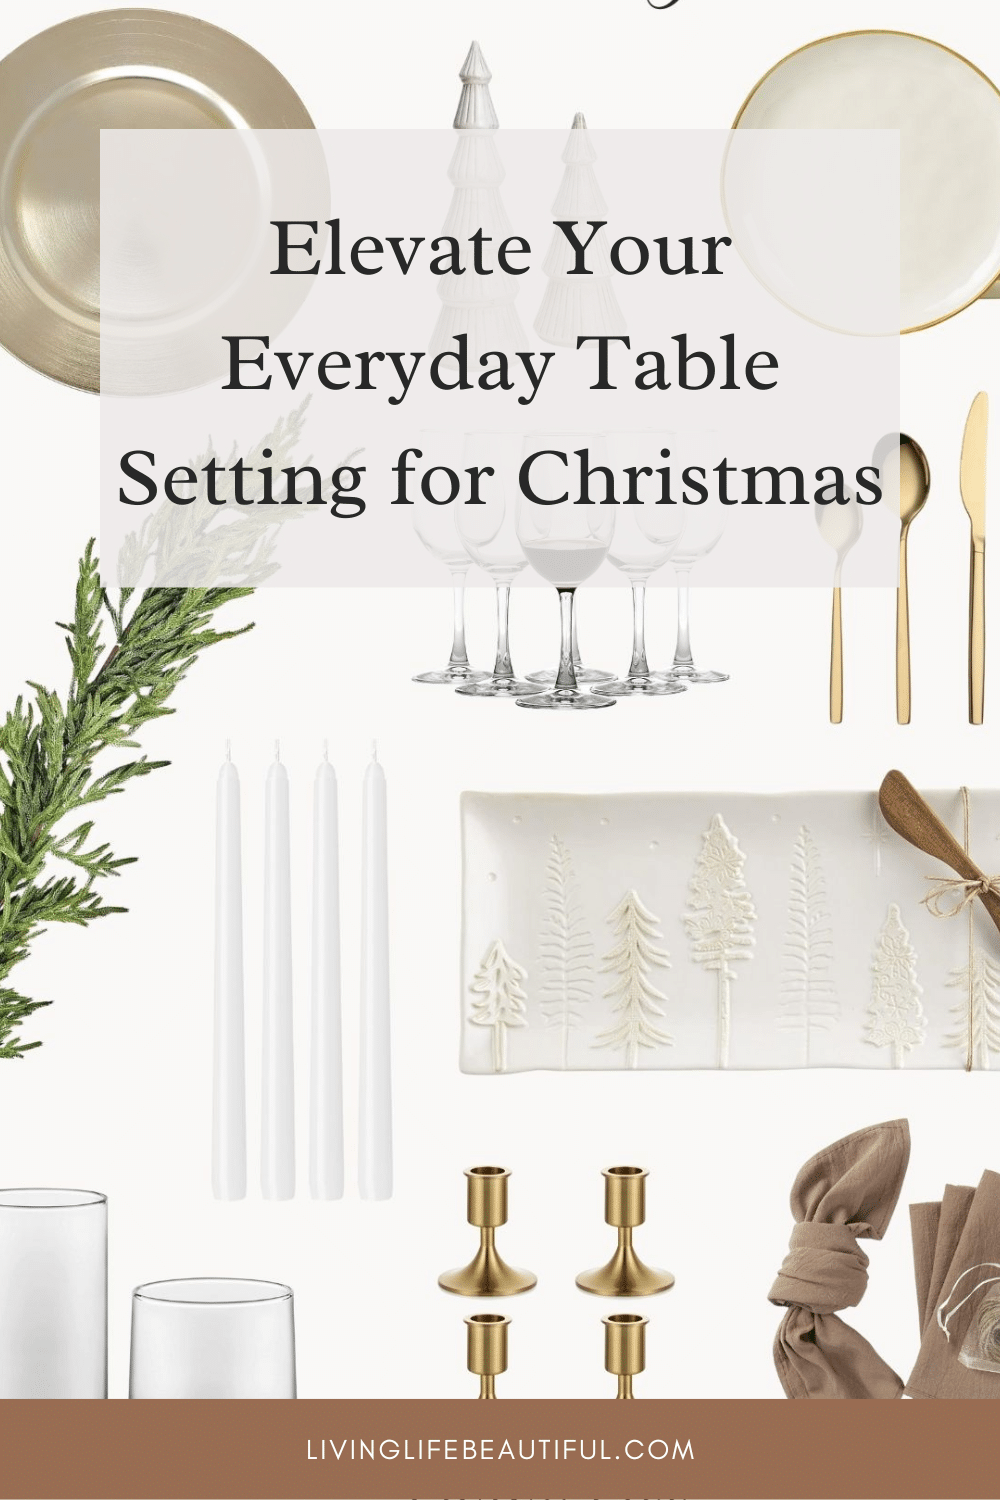 Elevate Your Everyday Table Setting for Christmas